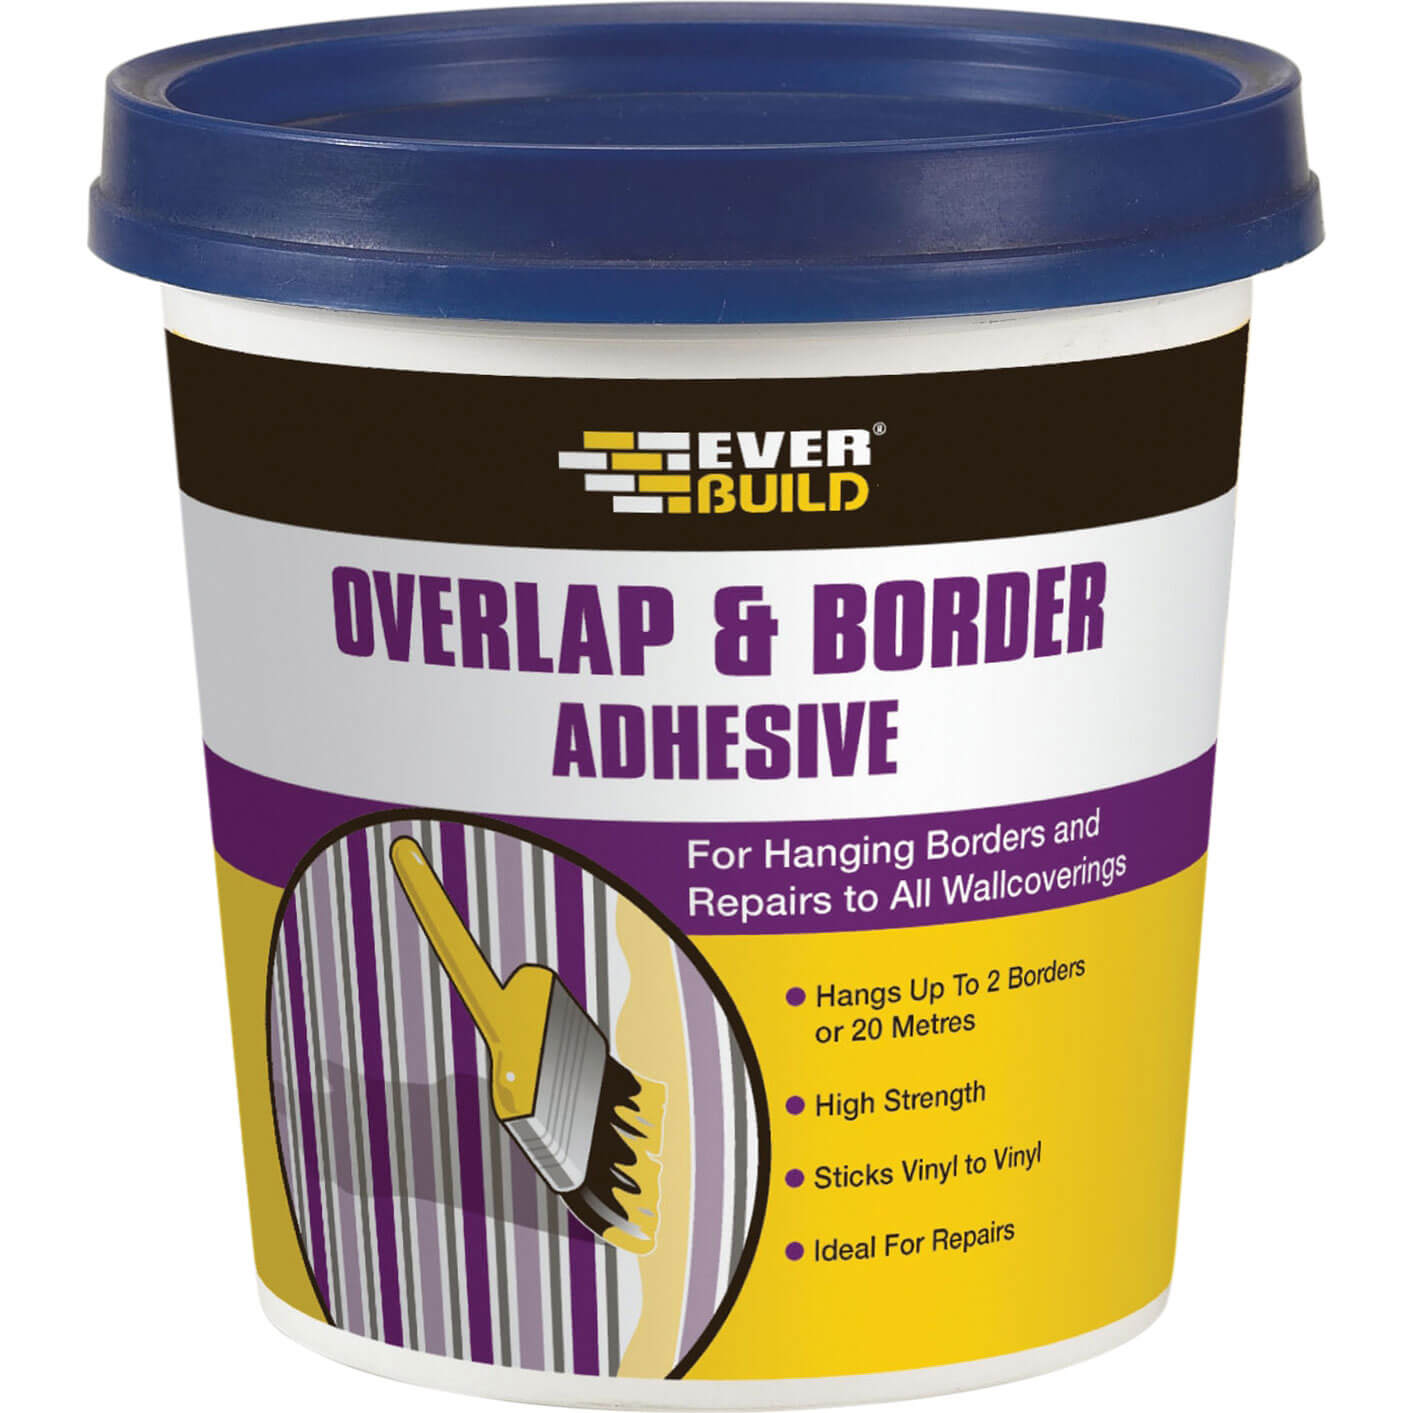 Image of Everbuild Overlap and Border Adhesive 500g